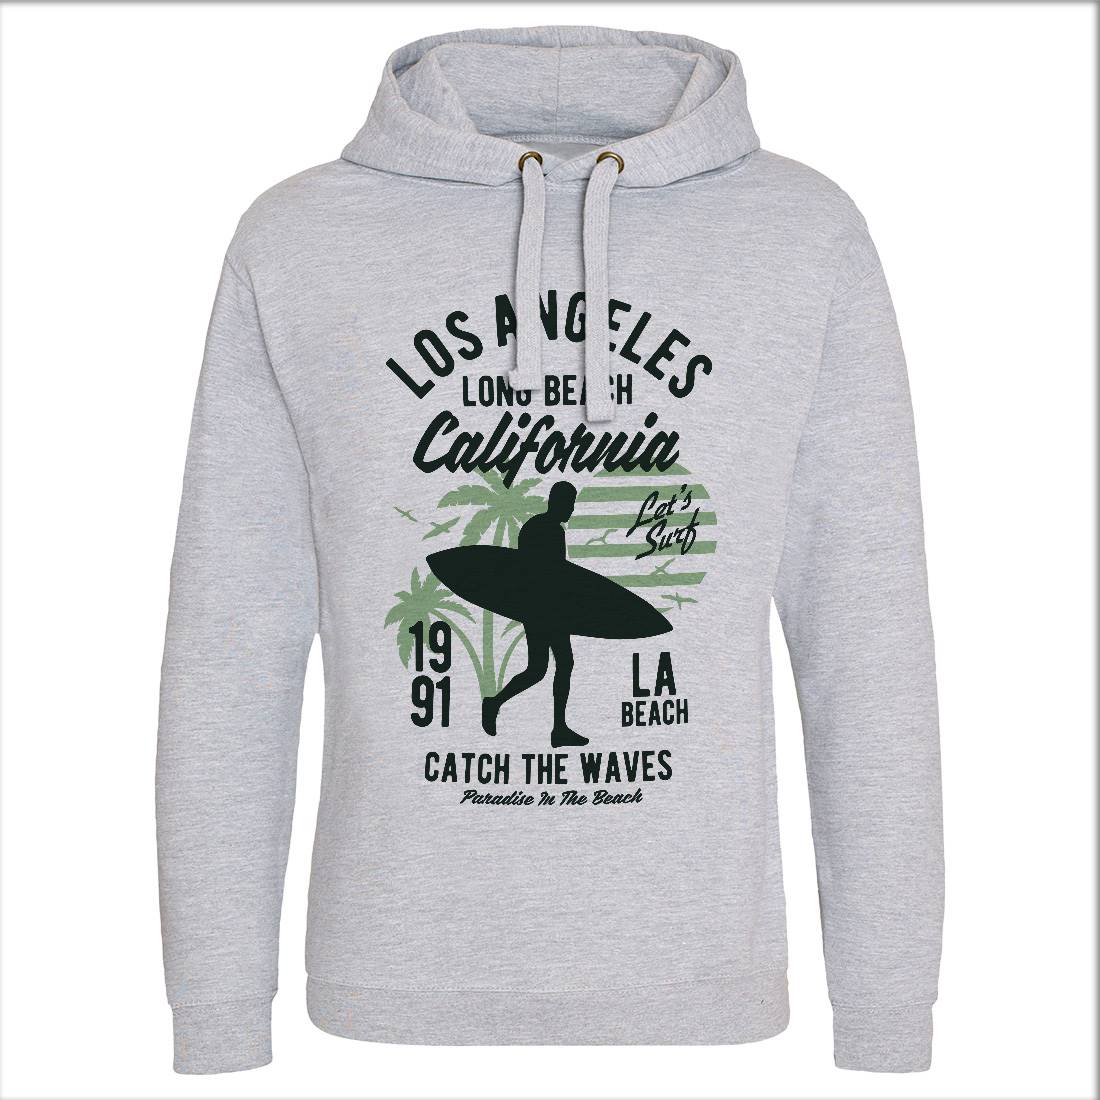 Los Angeles Long Mens Hoodie Without Pocket Surf B228